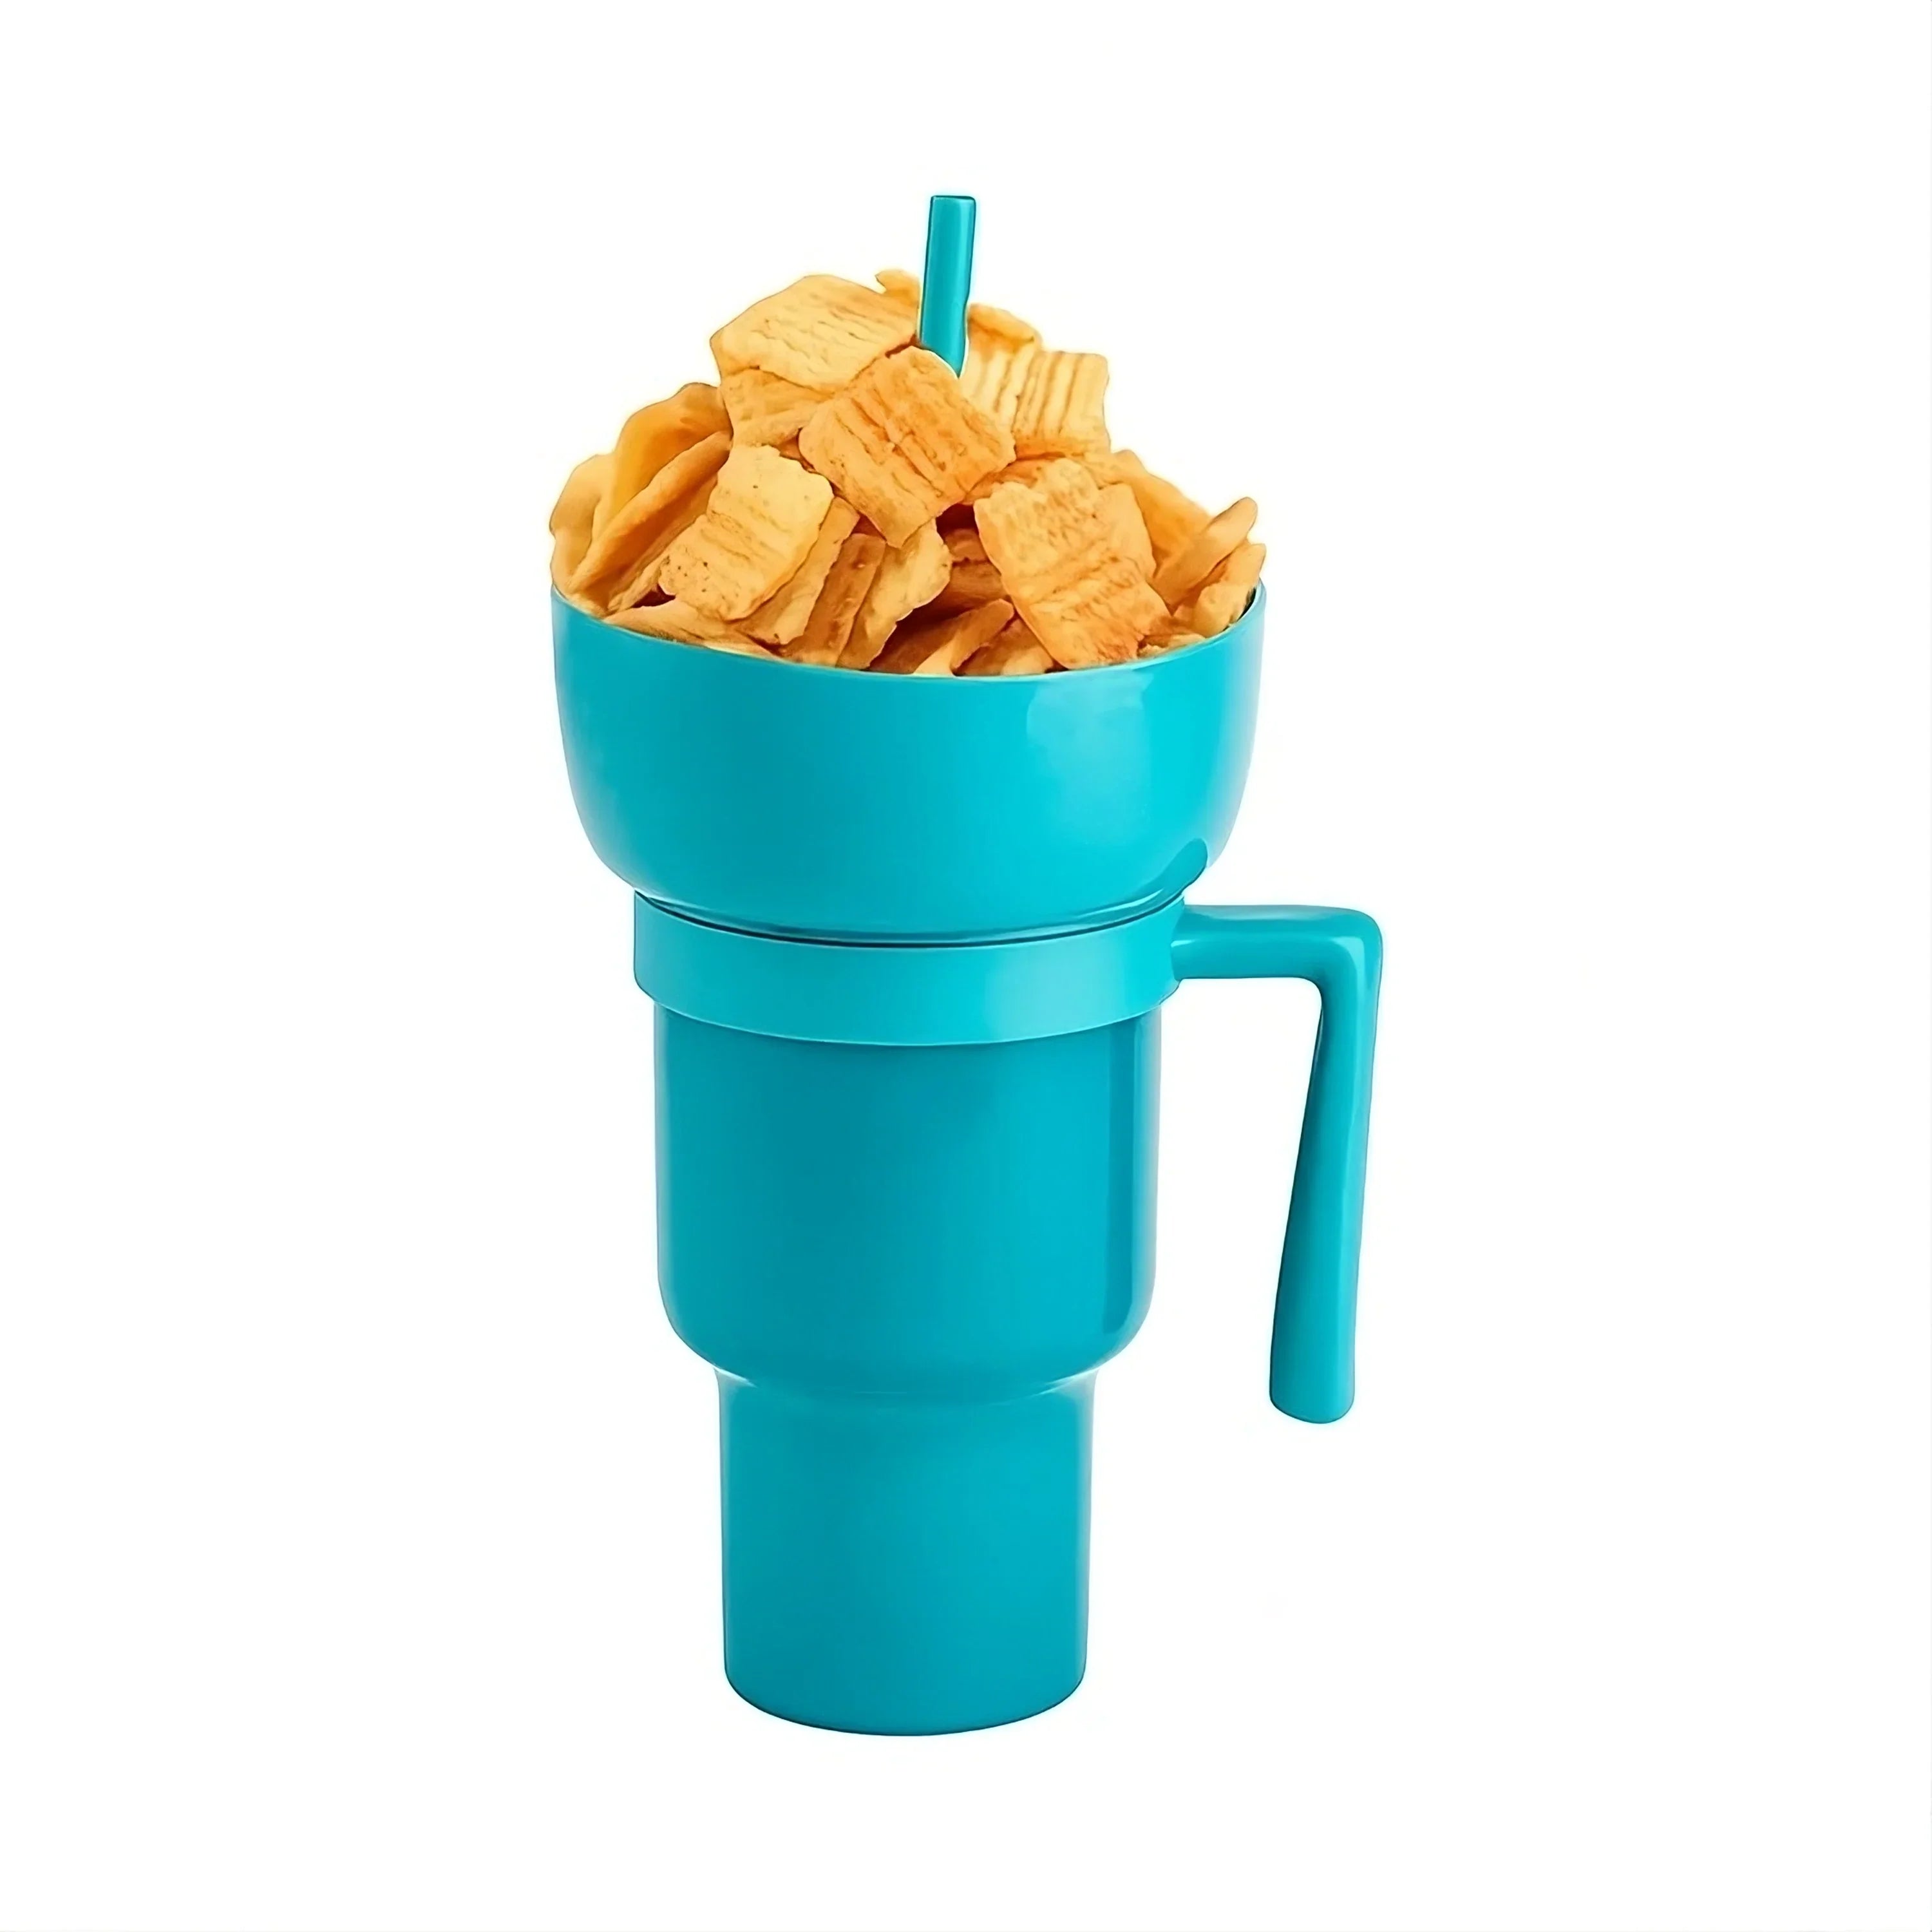 The SnackCup